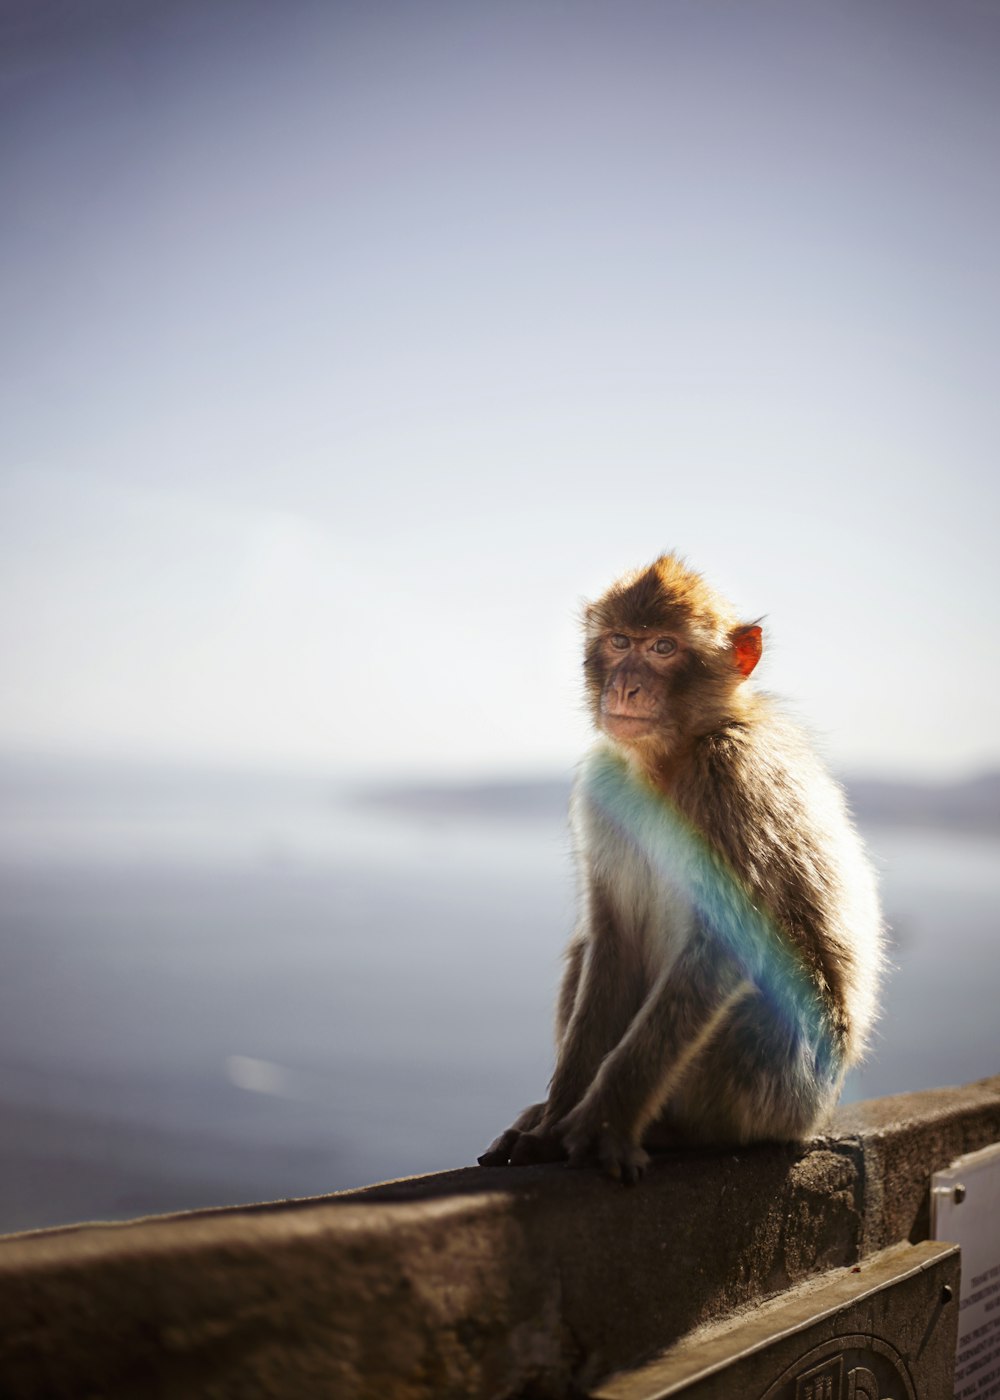 brown and white monkey sitting on brown wooden fence during daytime